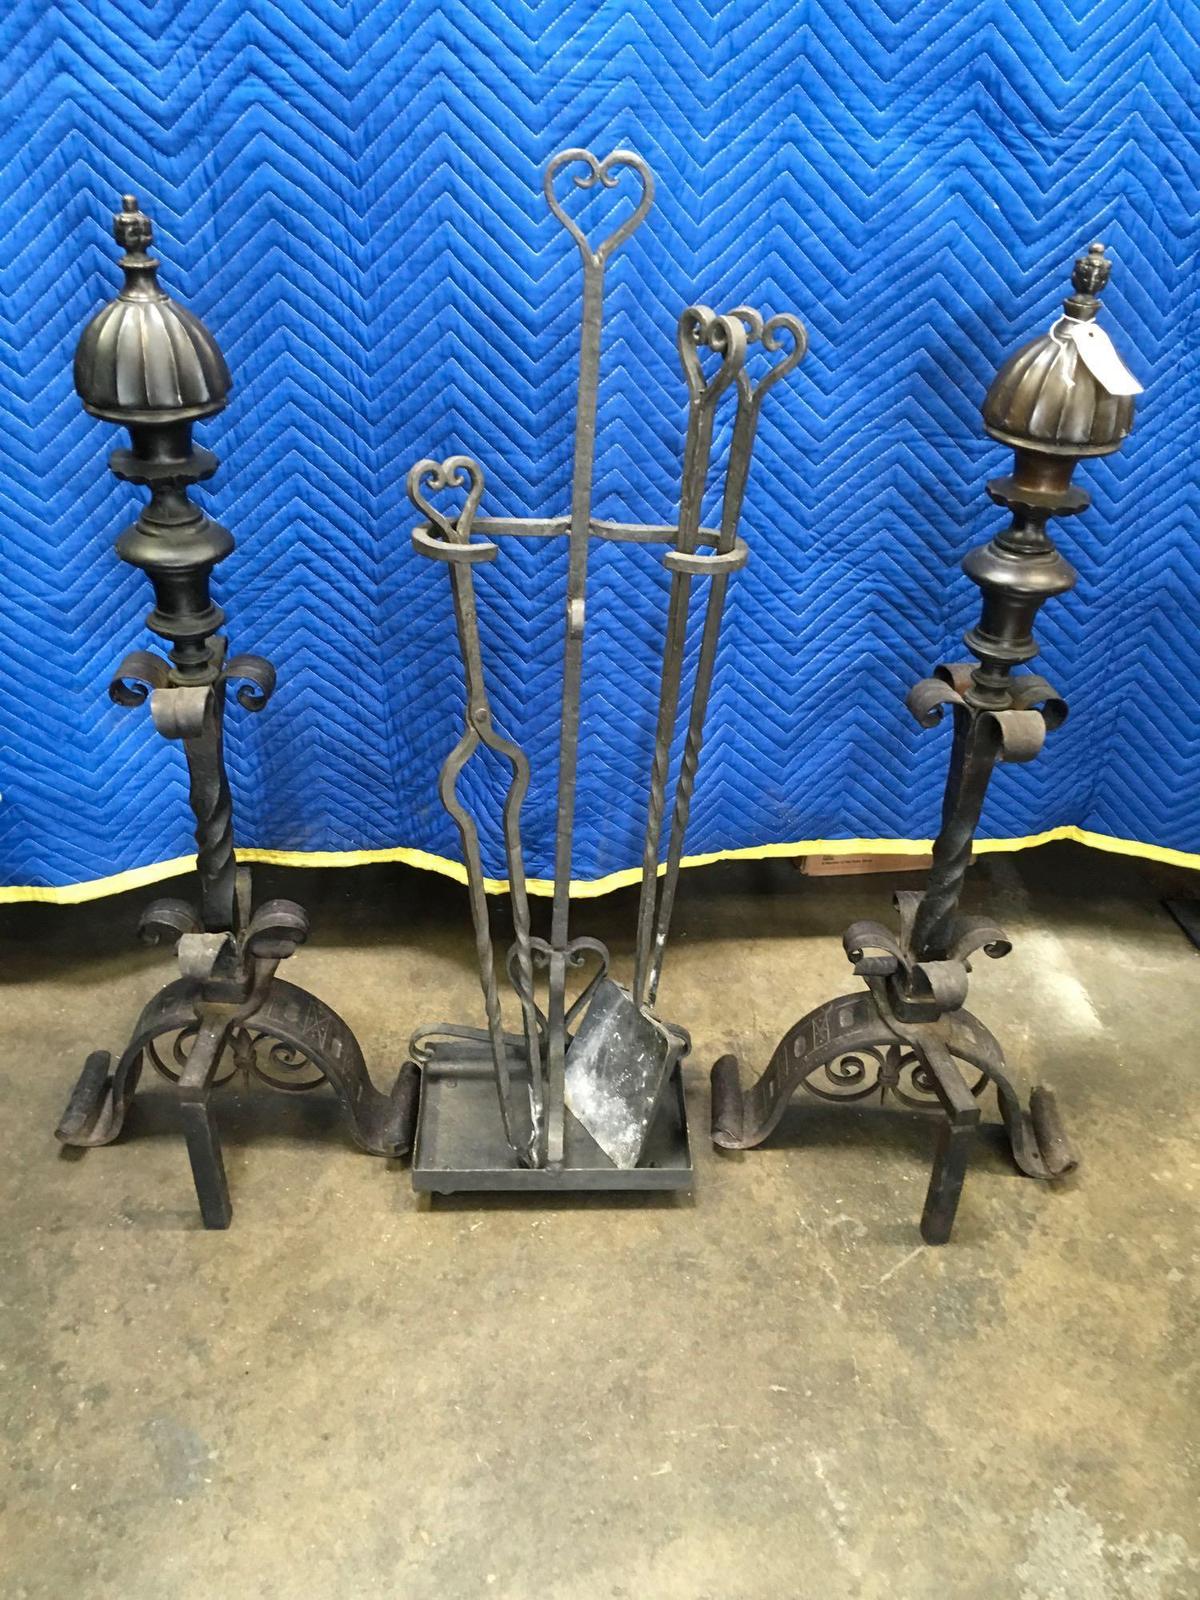 Antique fireplace ends and tool rack with tools. Steel Heavy!